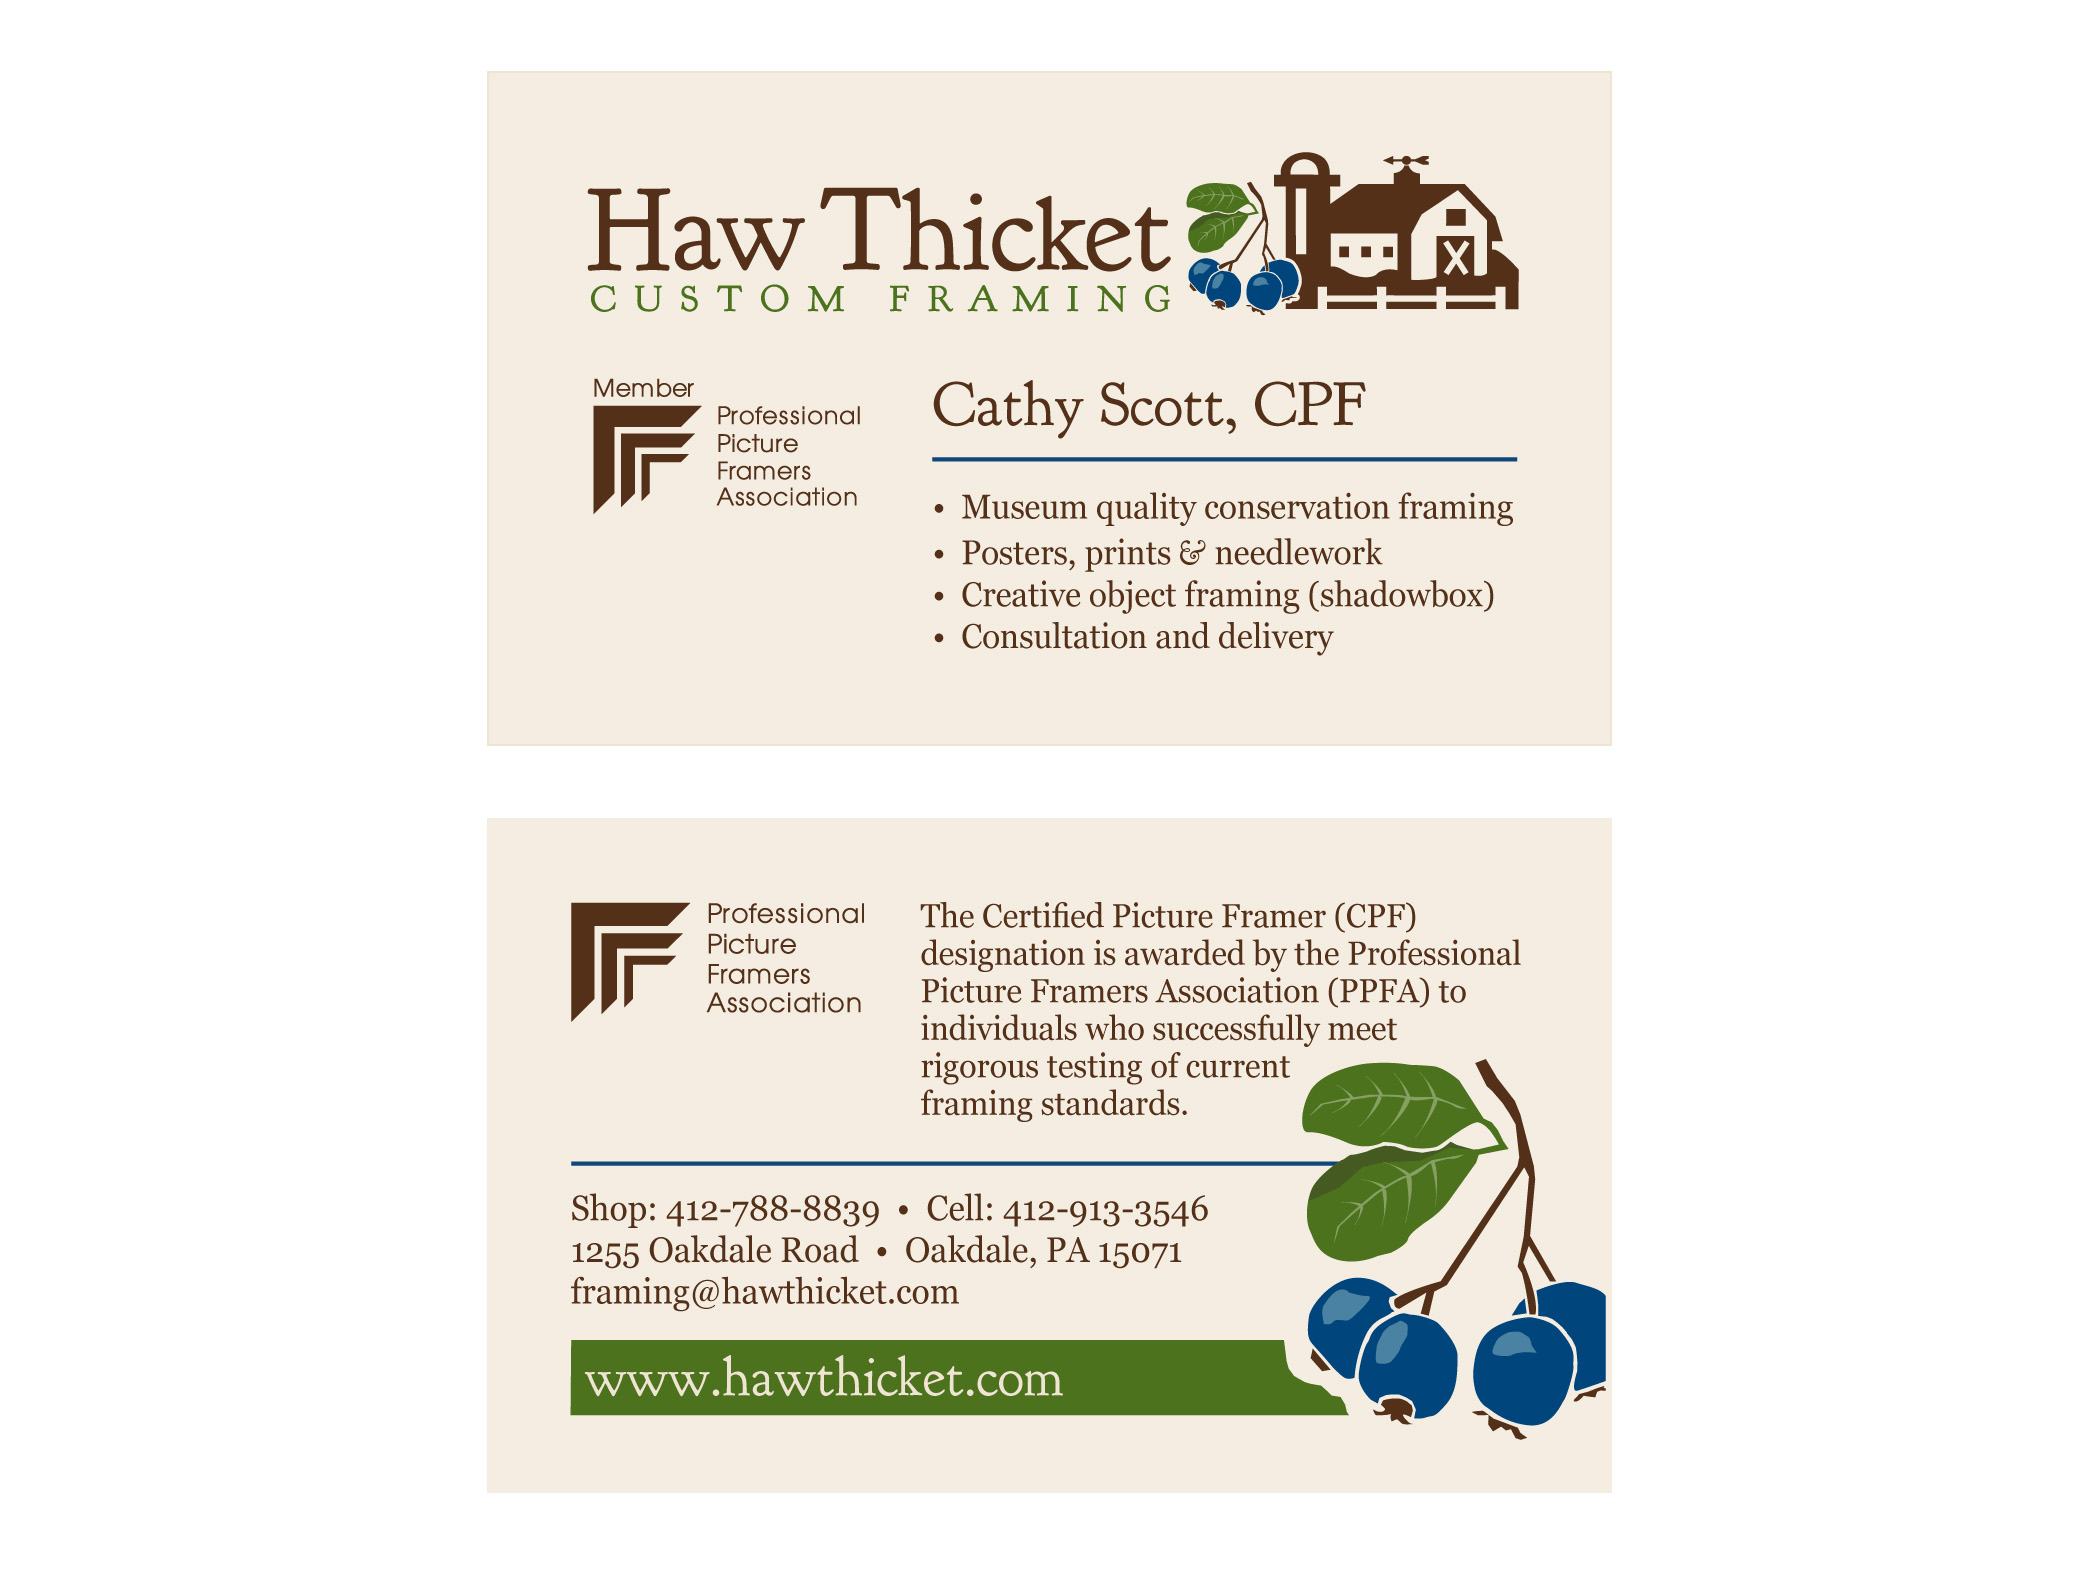 HAW THICKET BUSINESS CARD.JPG